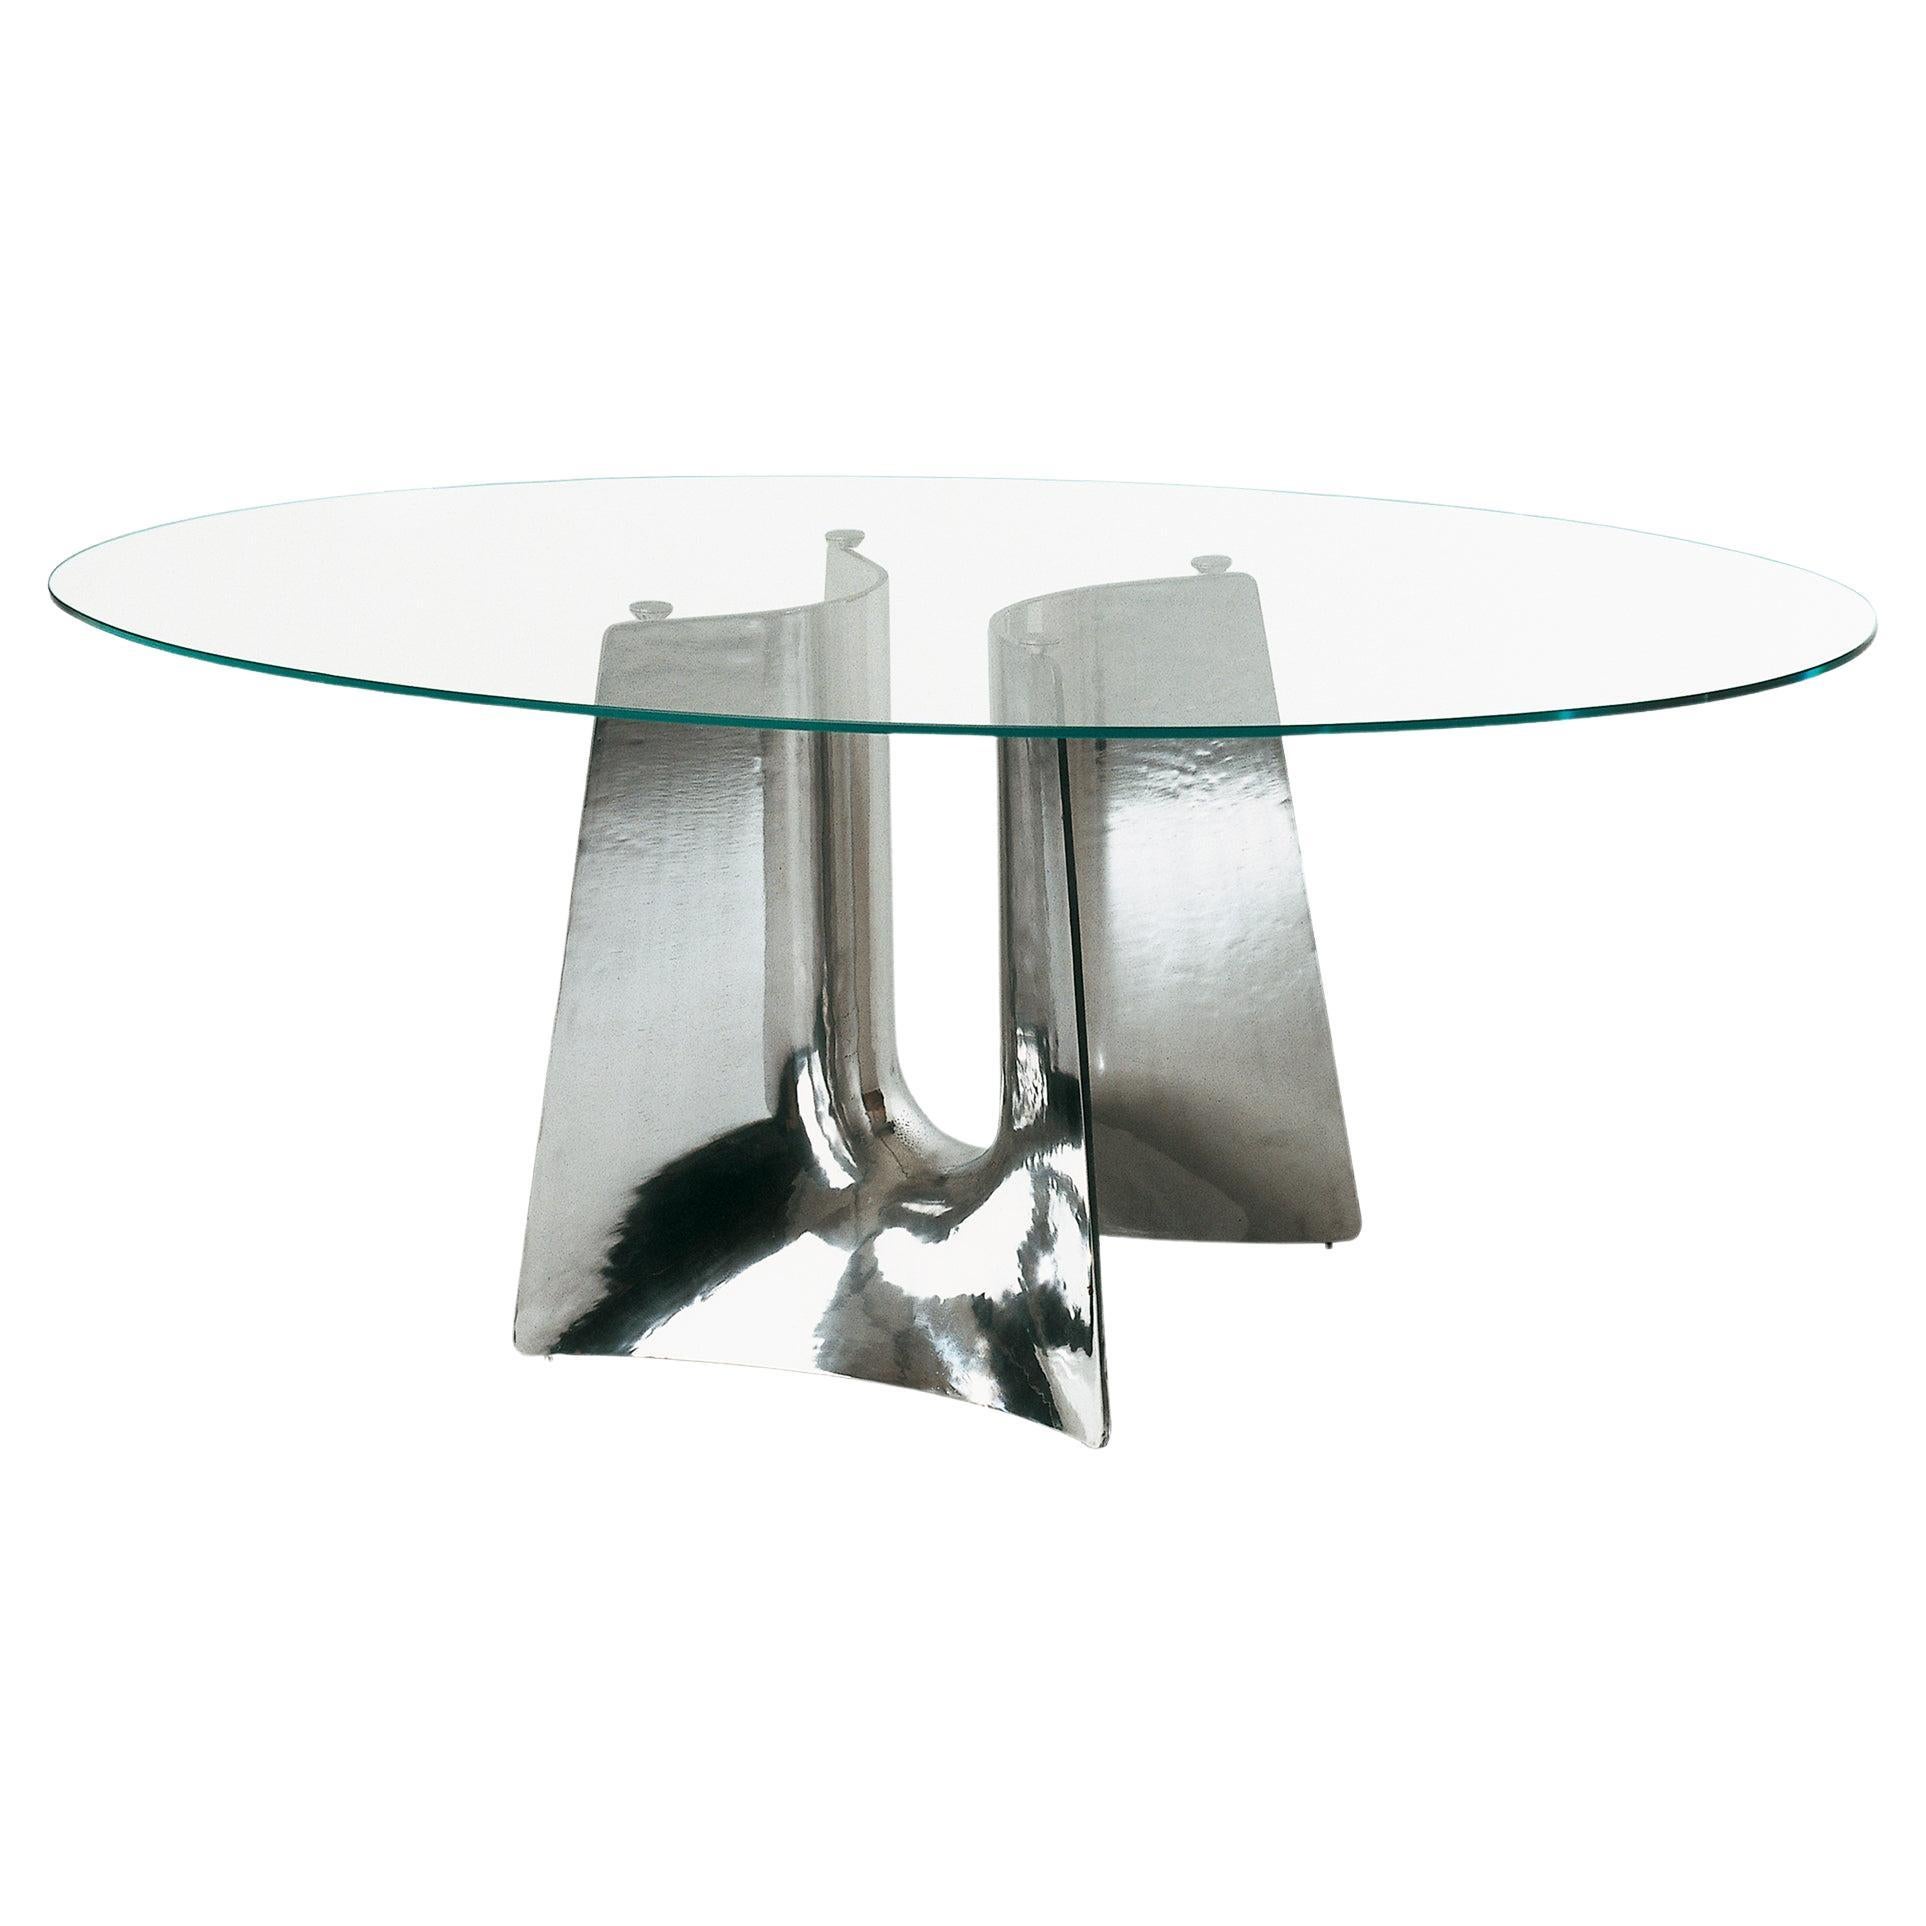 Baleri Italia Bentz High Round Aluminum Table with Glass Top by Jeff Miller For Sale